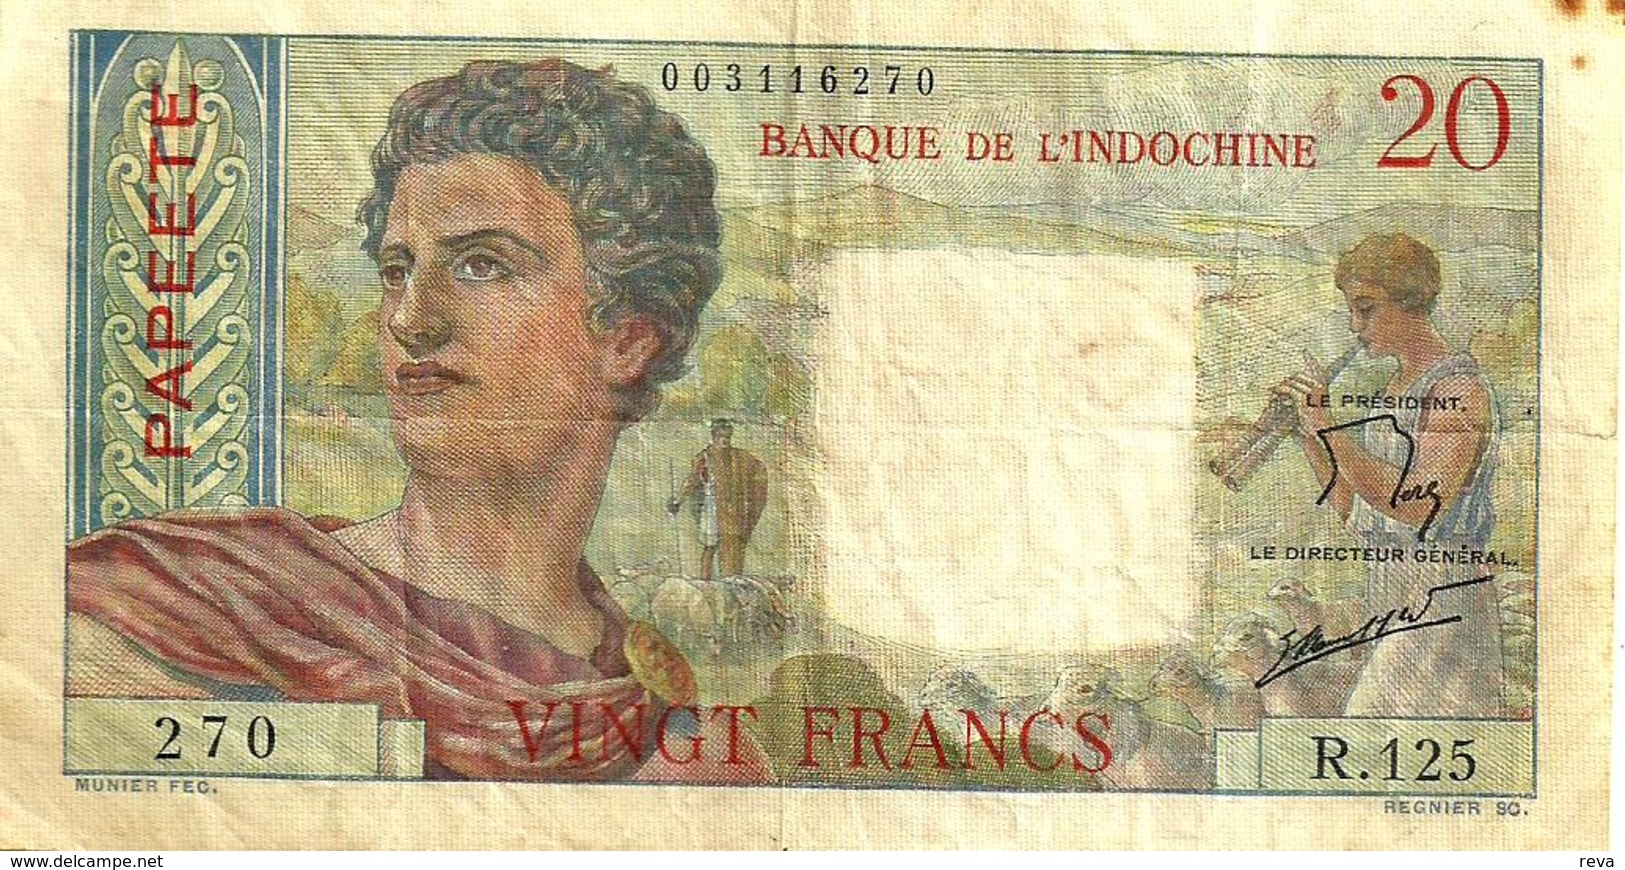 FRENCH POLYNESIA 20 FRANCS GREY MAN HEAD FRONT WOMAN BACK NOT DATED(1951) P21a 1ST SIG VARIETY VF READ DESCRIPTION!! - Papeete (French Polynesia 1914-1985)